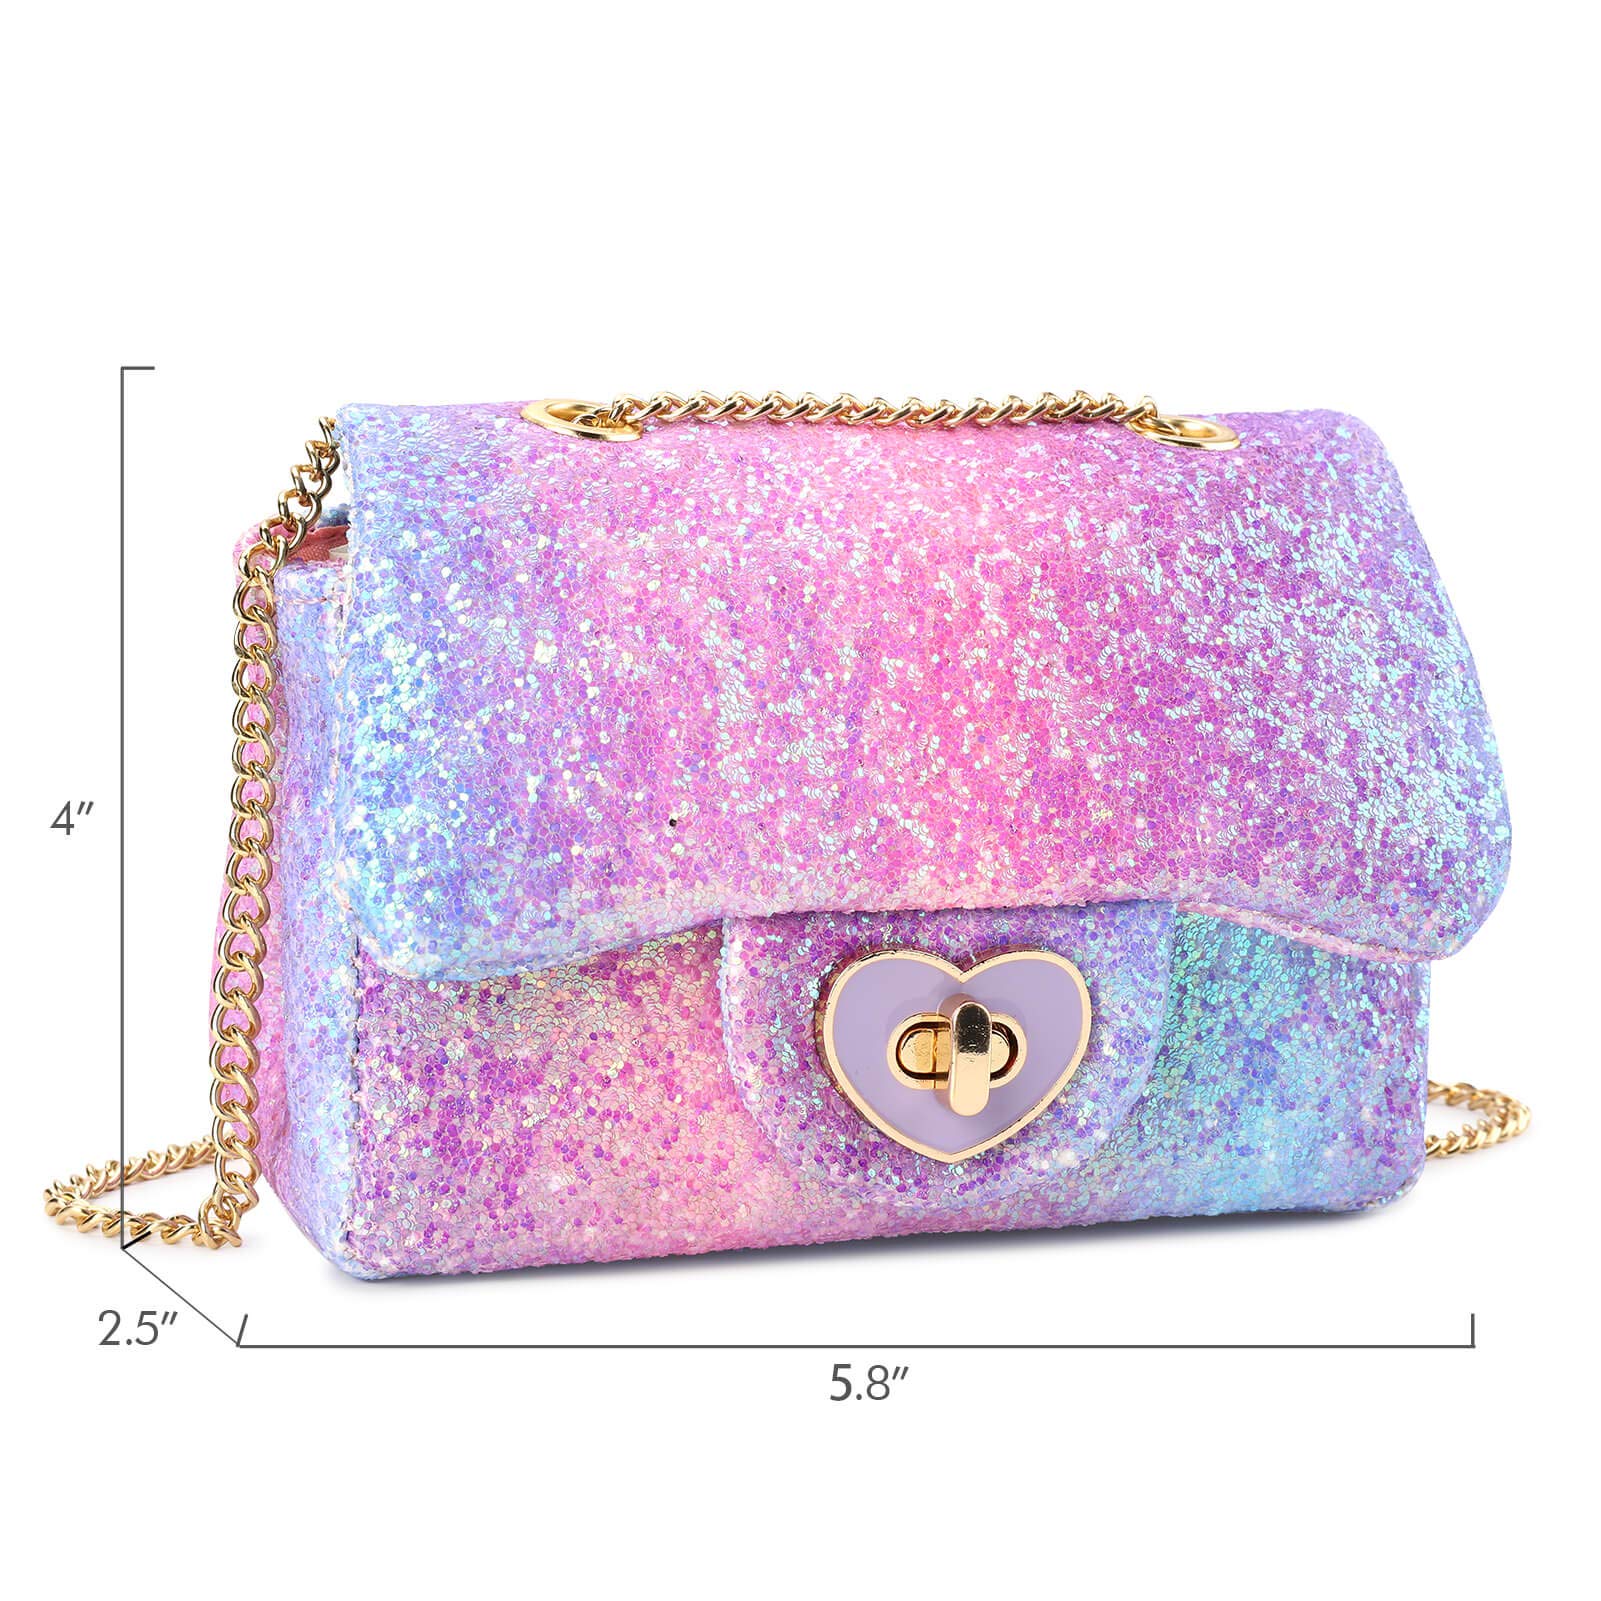 I gasped when I saw this BEBE Purse! It was so PINK, SPARKLY & DAINTY